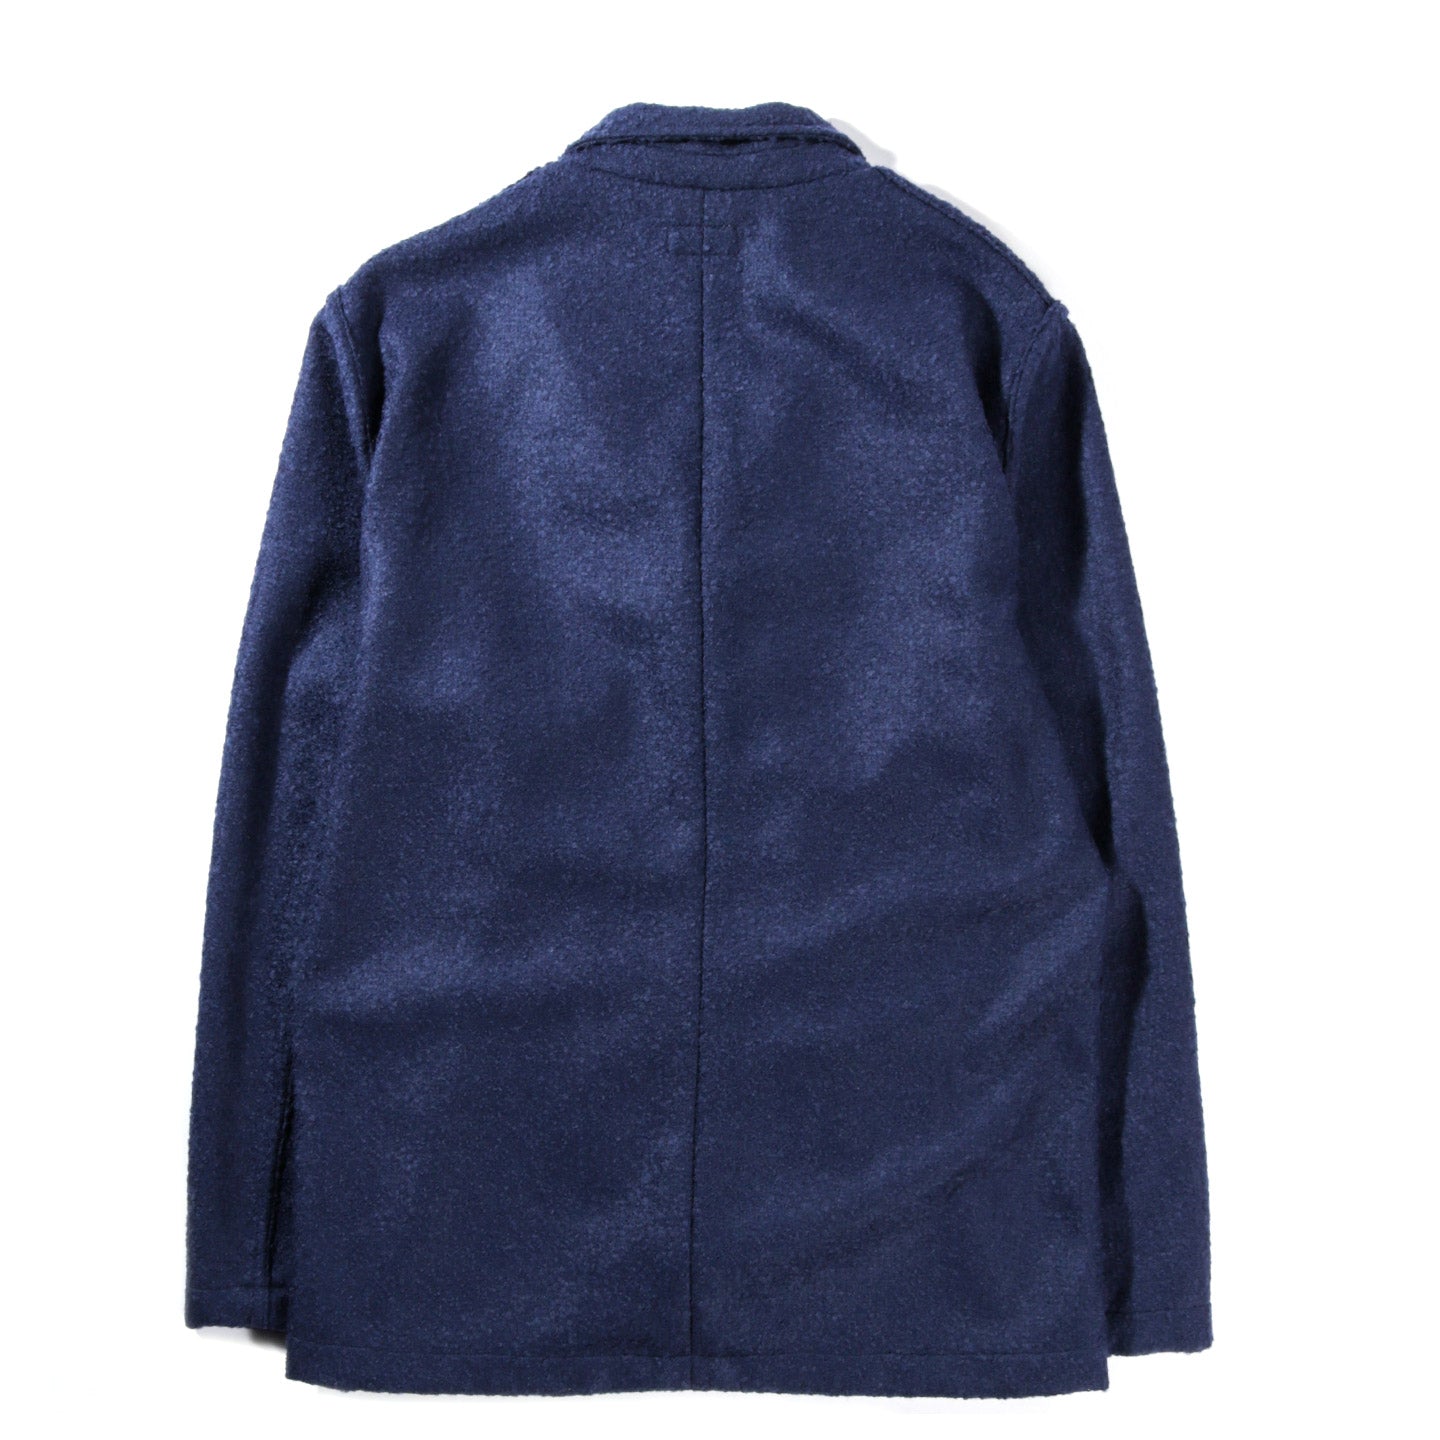 HOUSE OF ST. CLAIR CASS JACKET NAVY BOILED WOOL